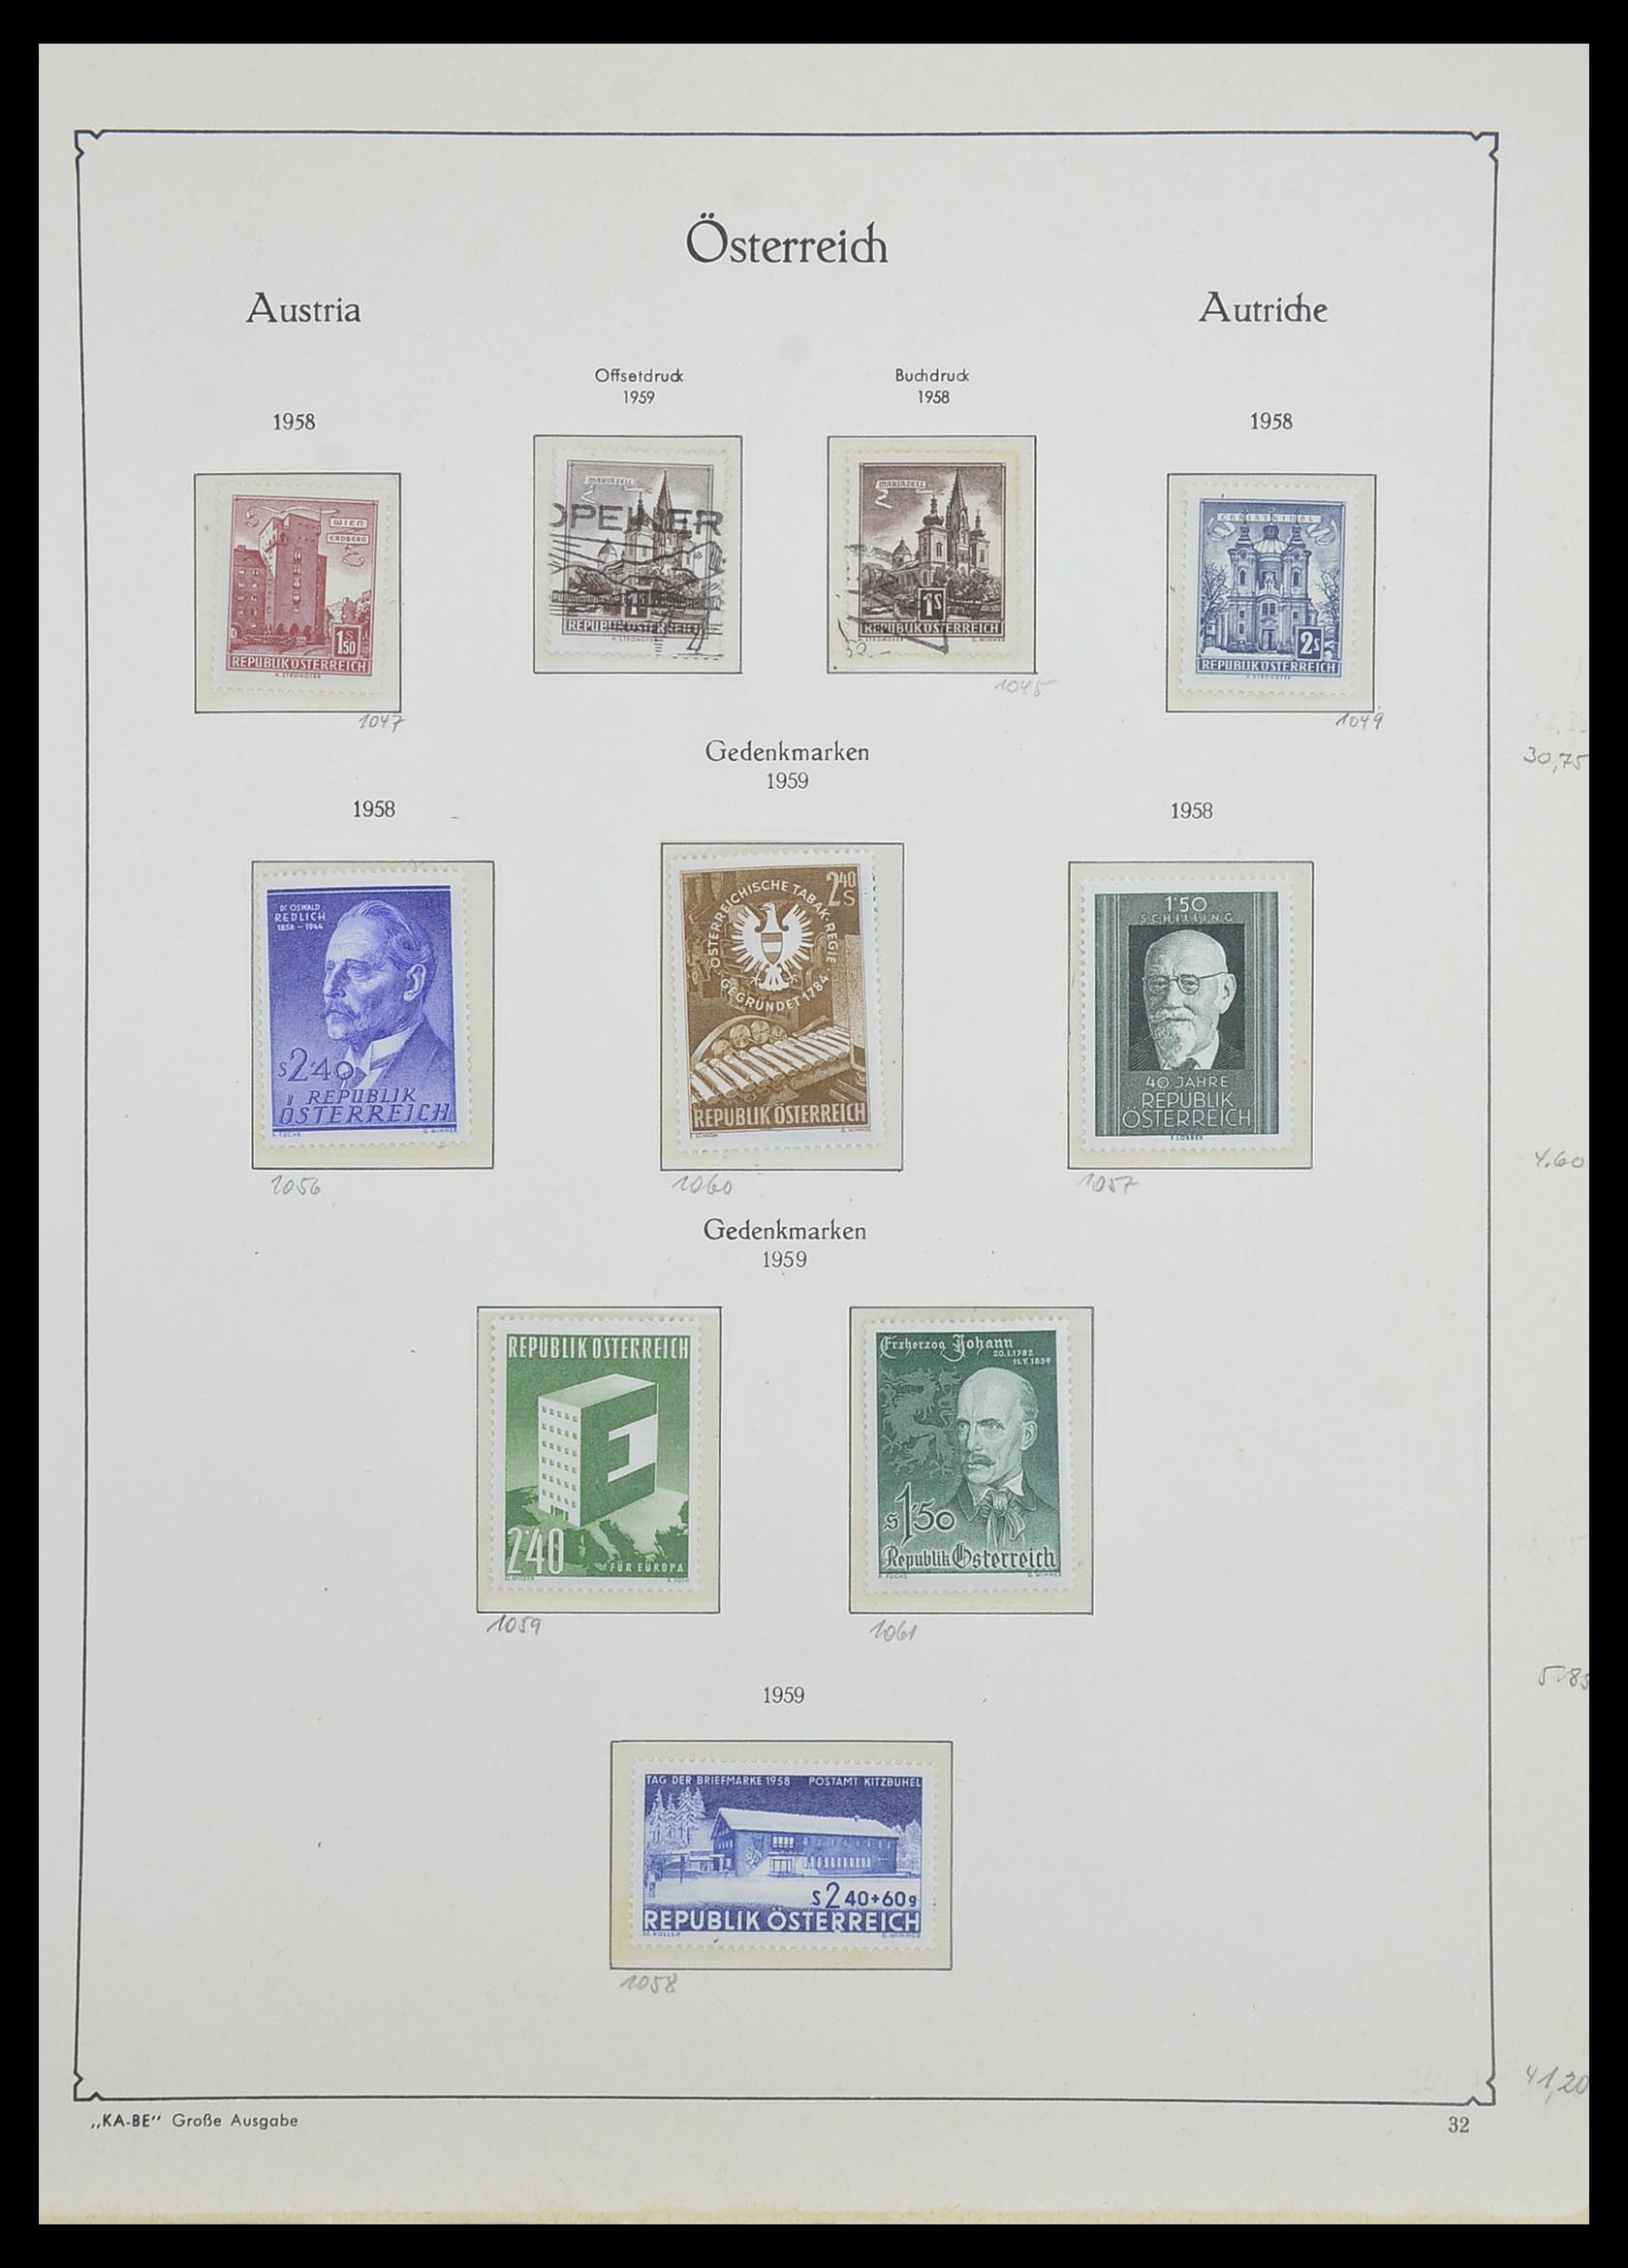 33593 073 - Stamp collection 33593 Austria and territories 1850-1959.